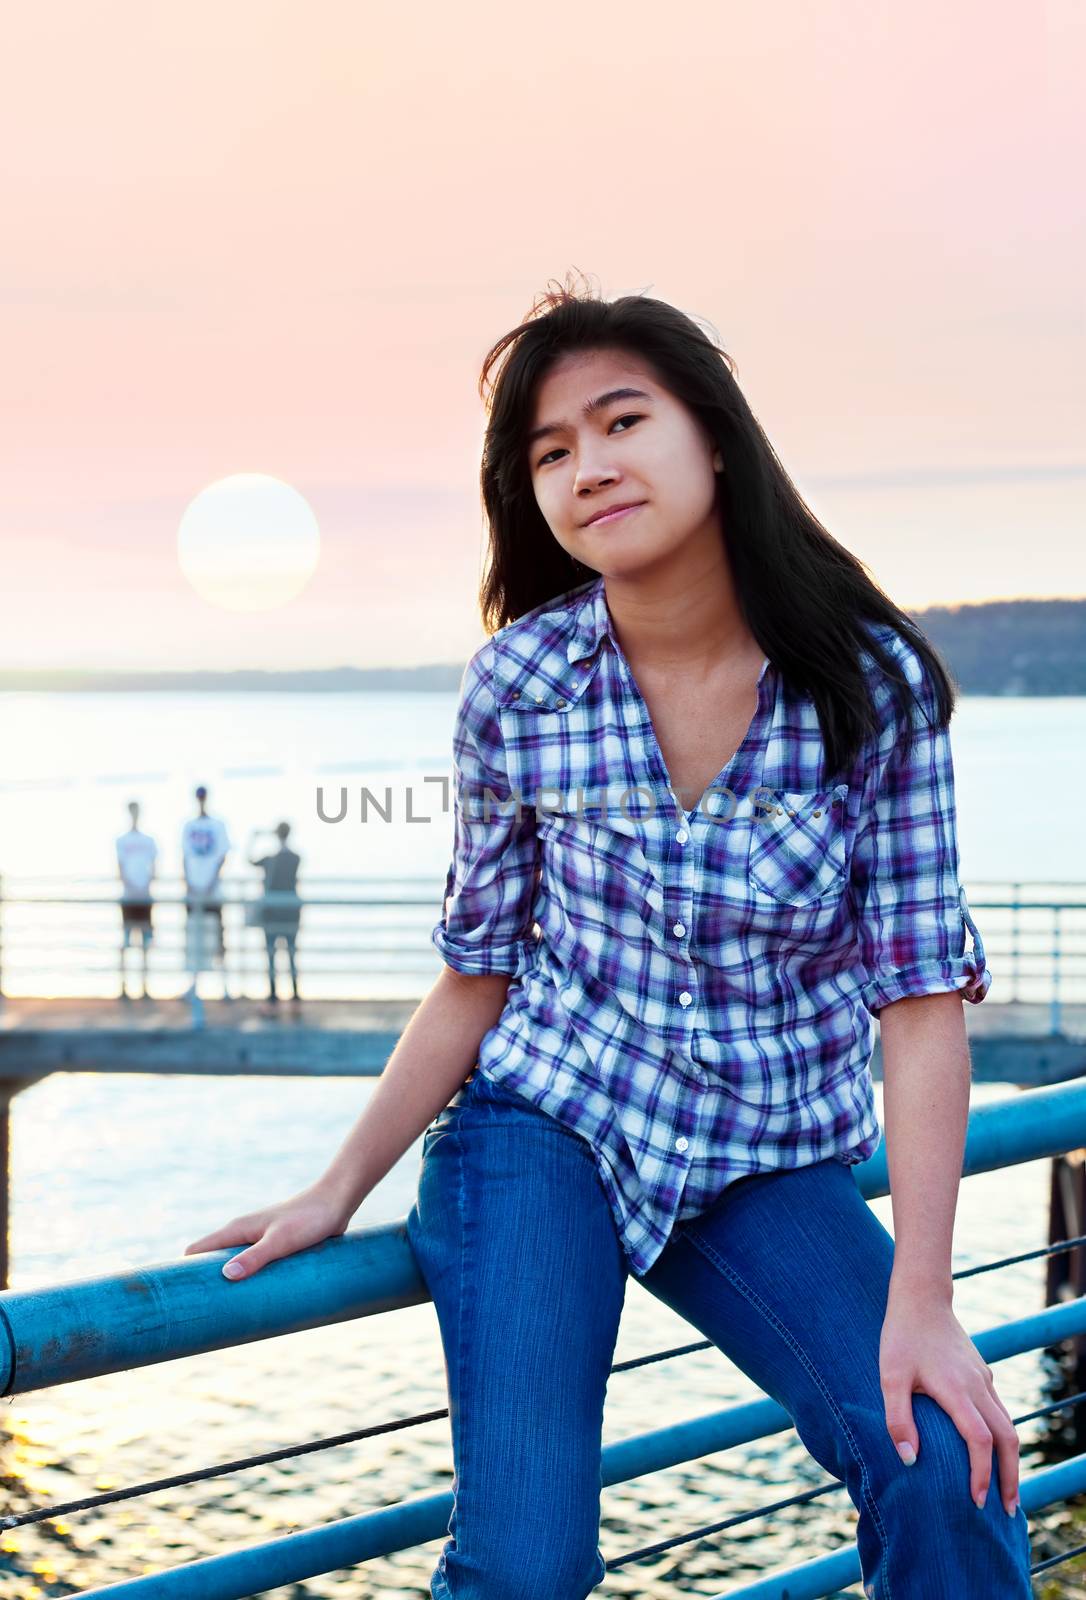 Young teen biracial Asian girl sitting on metal railing by lake at sunset, smiling and relaxing